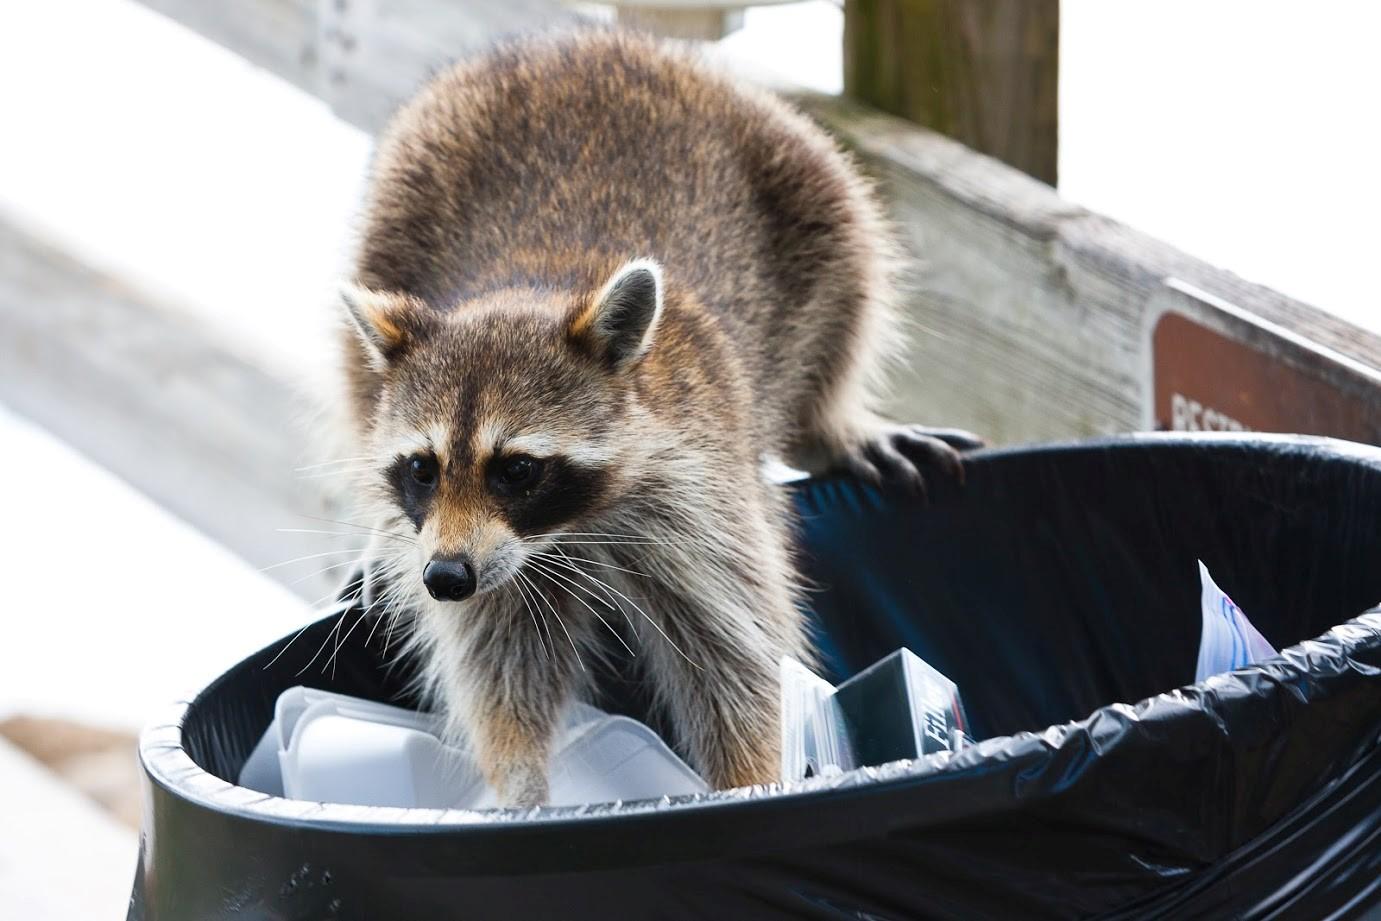 Animal on the Dumpster - Chicago, IL - Tri-State Disposal